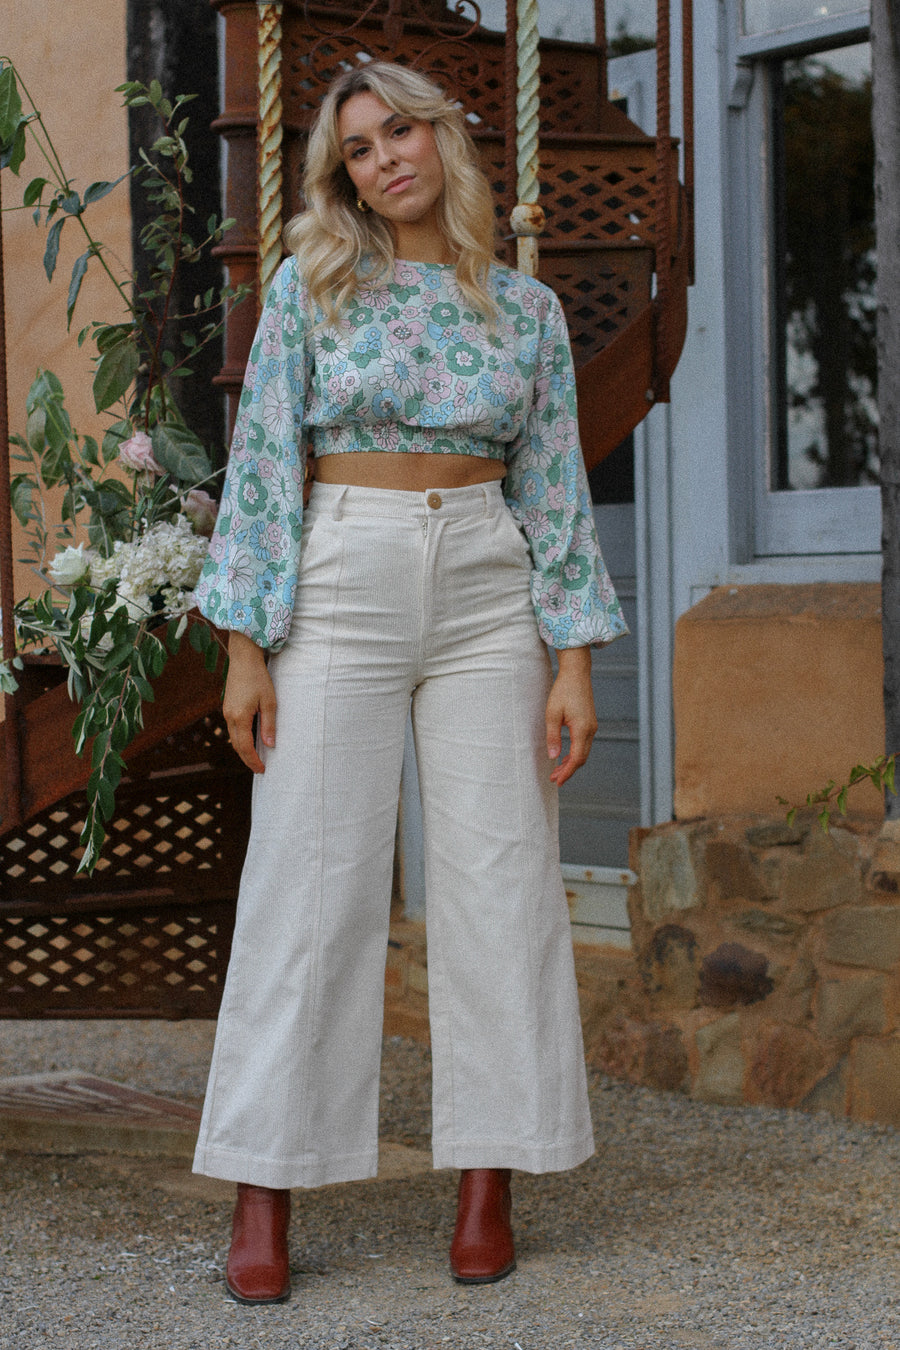 Sunday pants in nectar  70s inspired fashion, 70s inspired